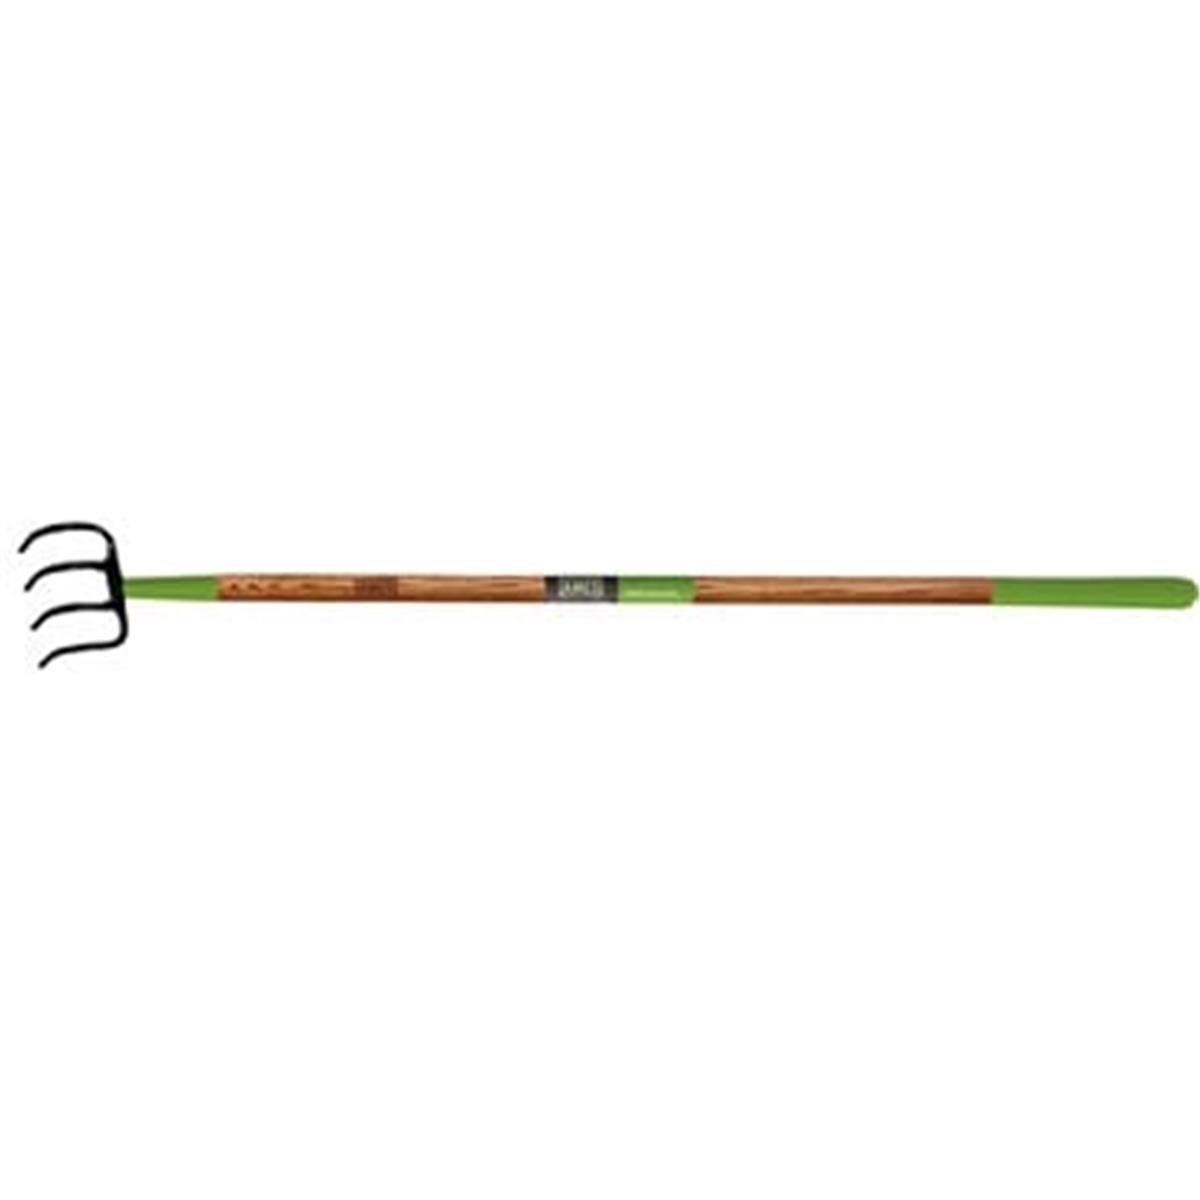 Ame2853600 Cultivator Ash Handle 15 Year